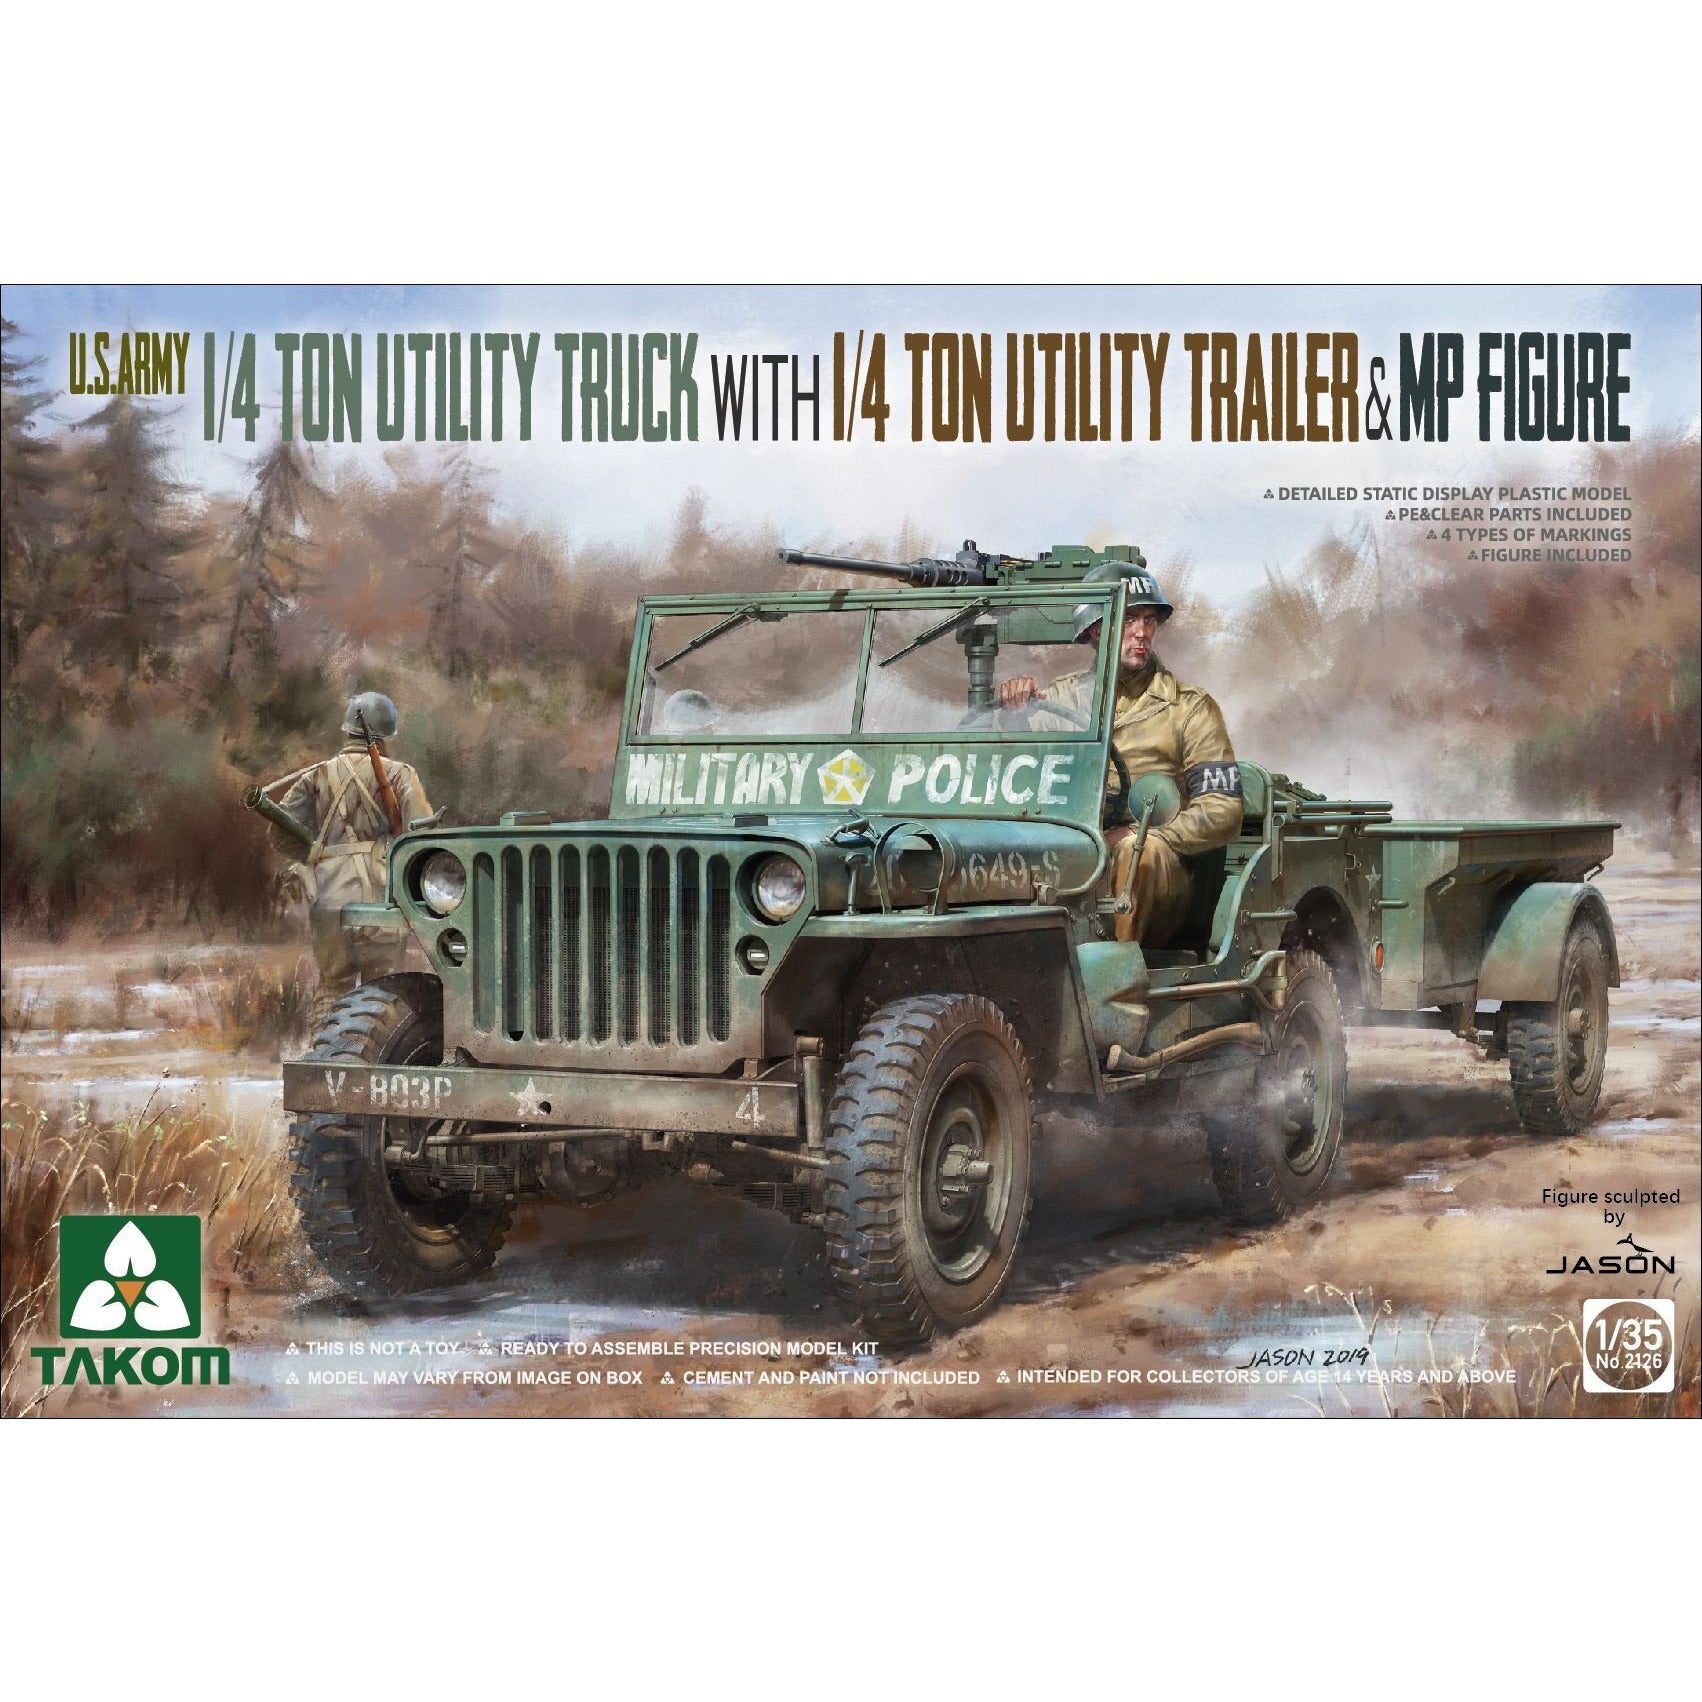 US Army1/4 Ton Utility Truck with Trailer & MP Figure 1/35 by Takom